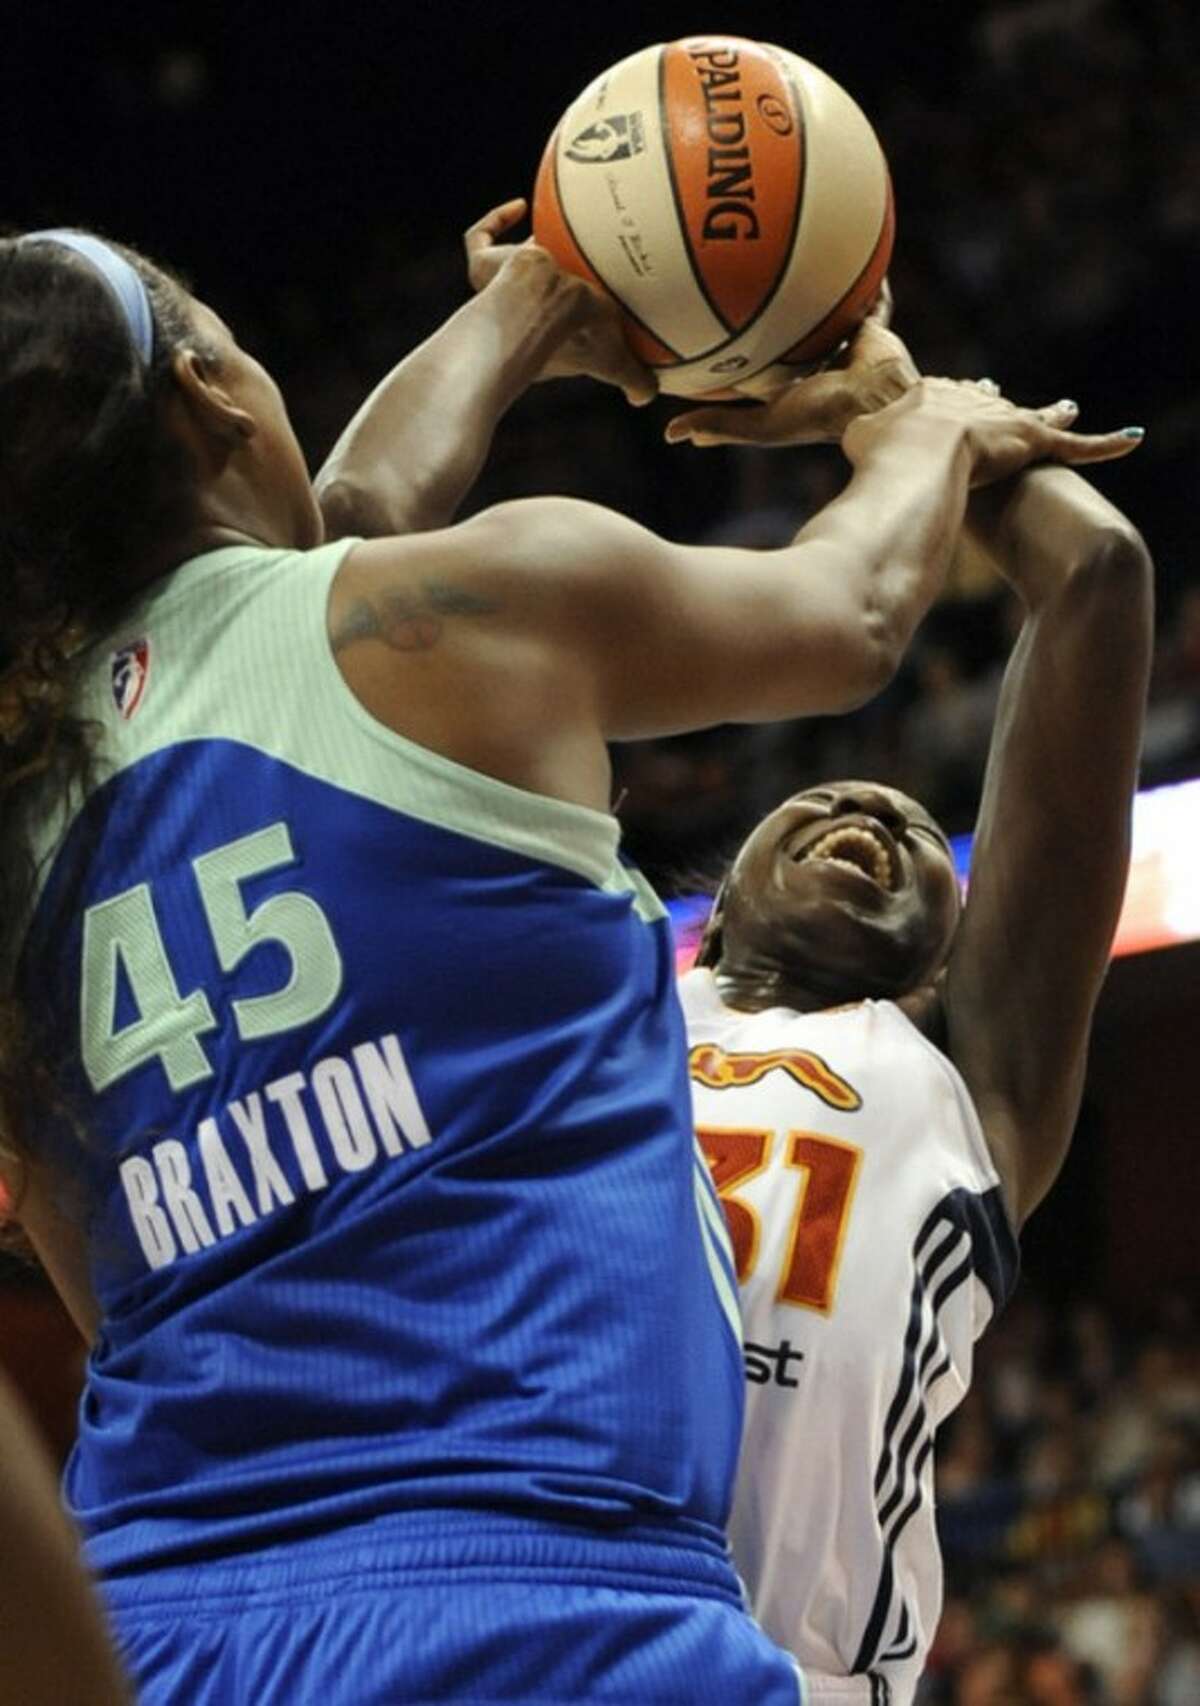 Connecticut Sun's Tina Charles, right, is fouled by New York Liberty's Kara Braxton (45) during the first half of a WNBA basketball game in Uncasville, Conn., Saturday, Aug. 18, 2012. (AP Photo/Jessica Hill)